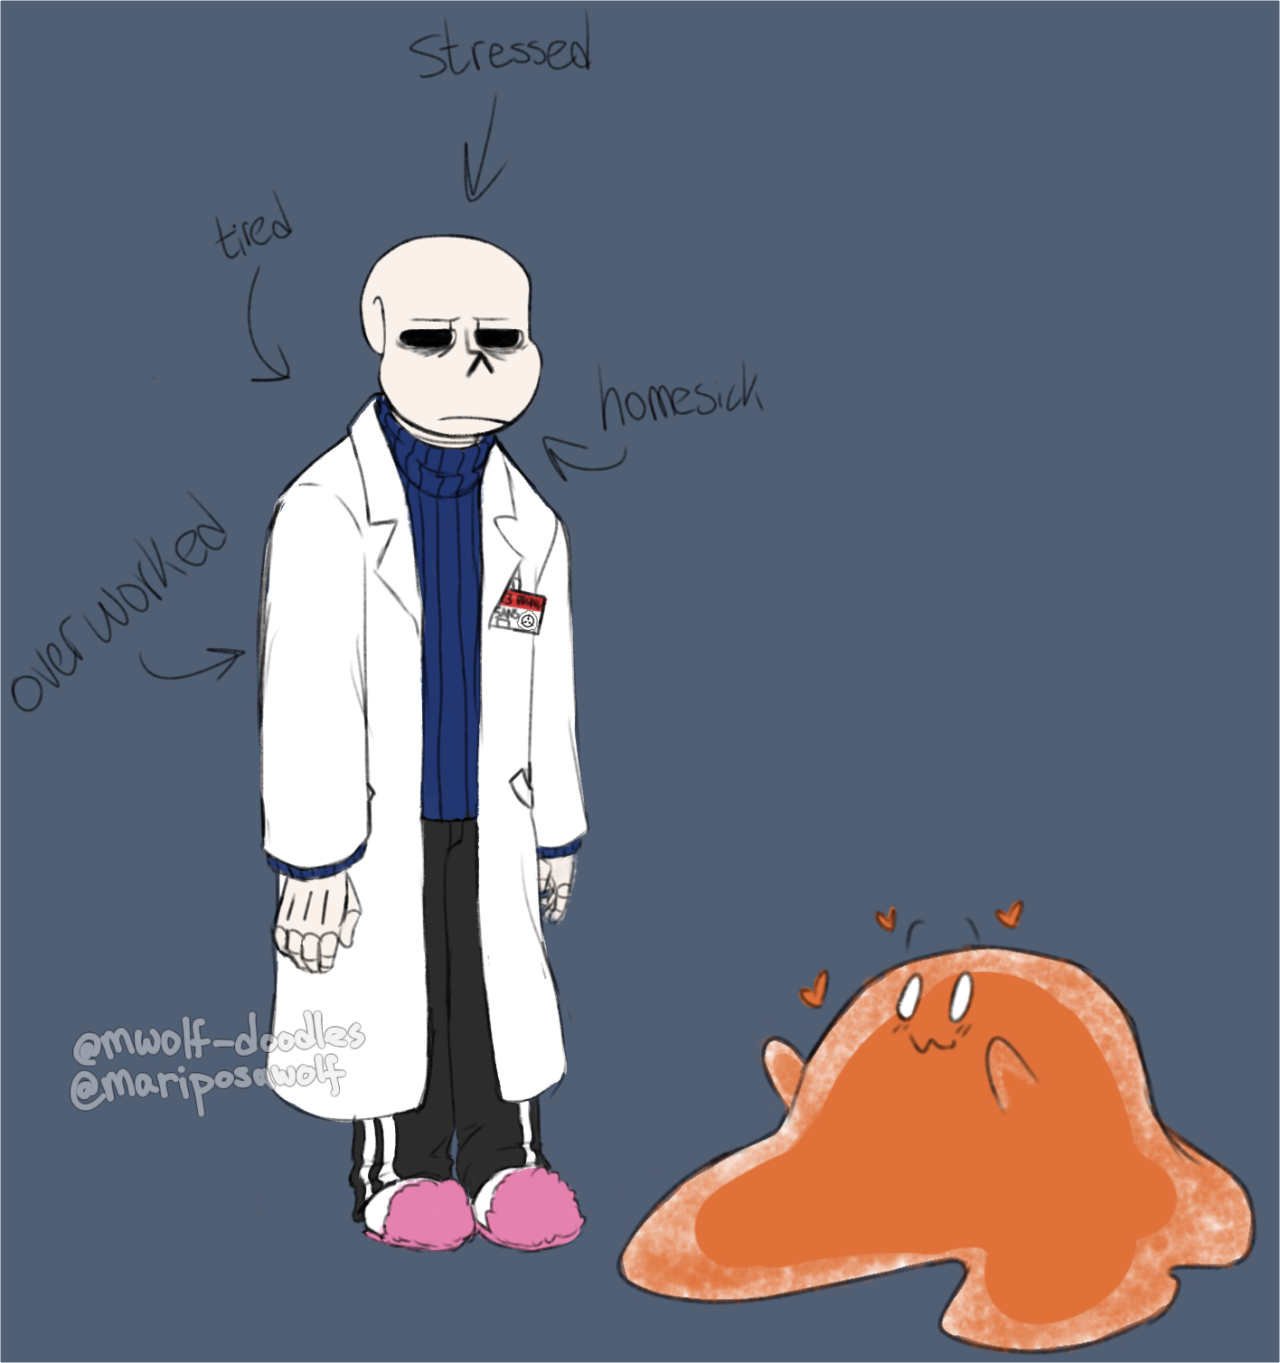 Rare SCP fanart and crossover with Undertale • r/Undertale : r/SCP